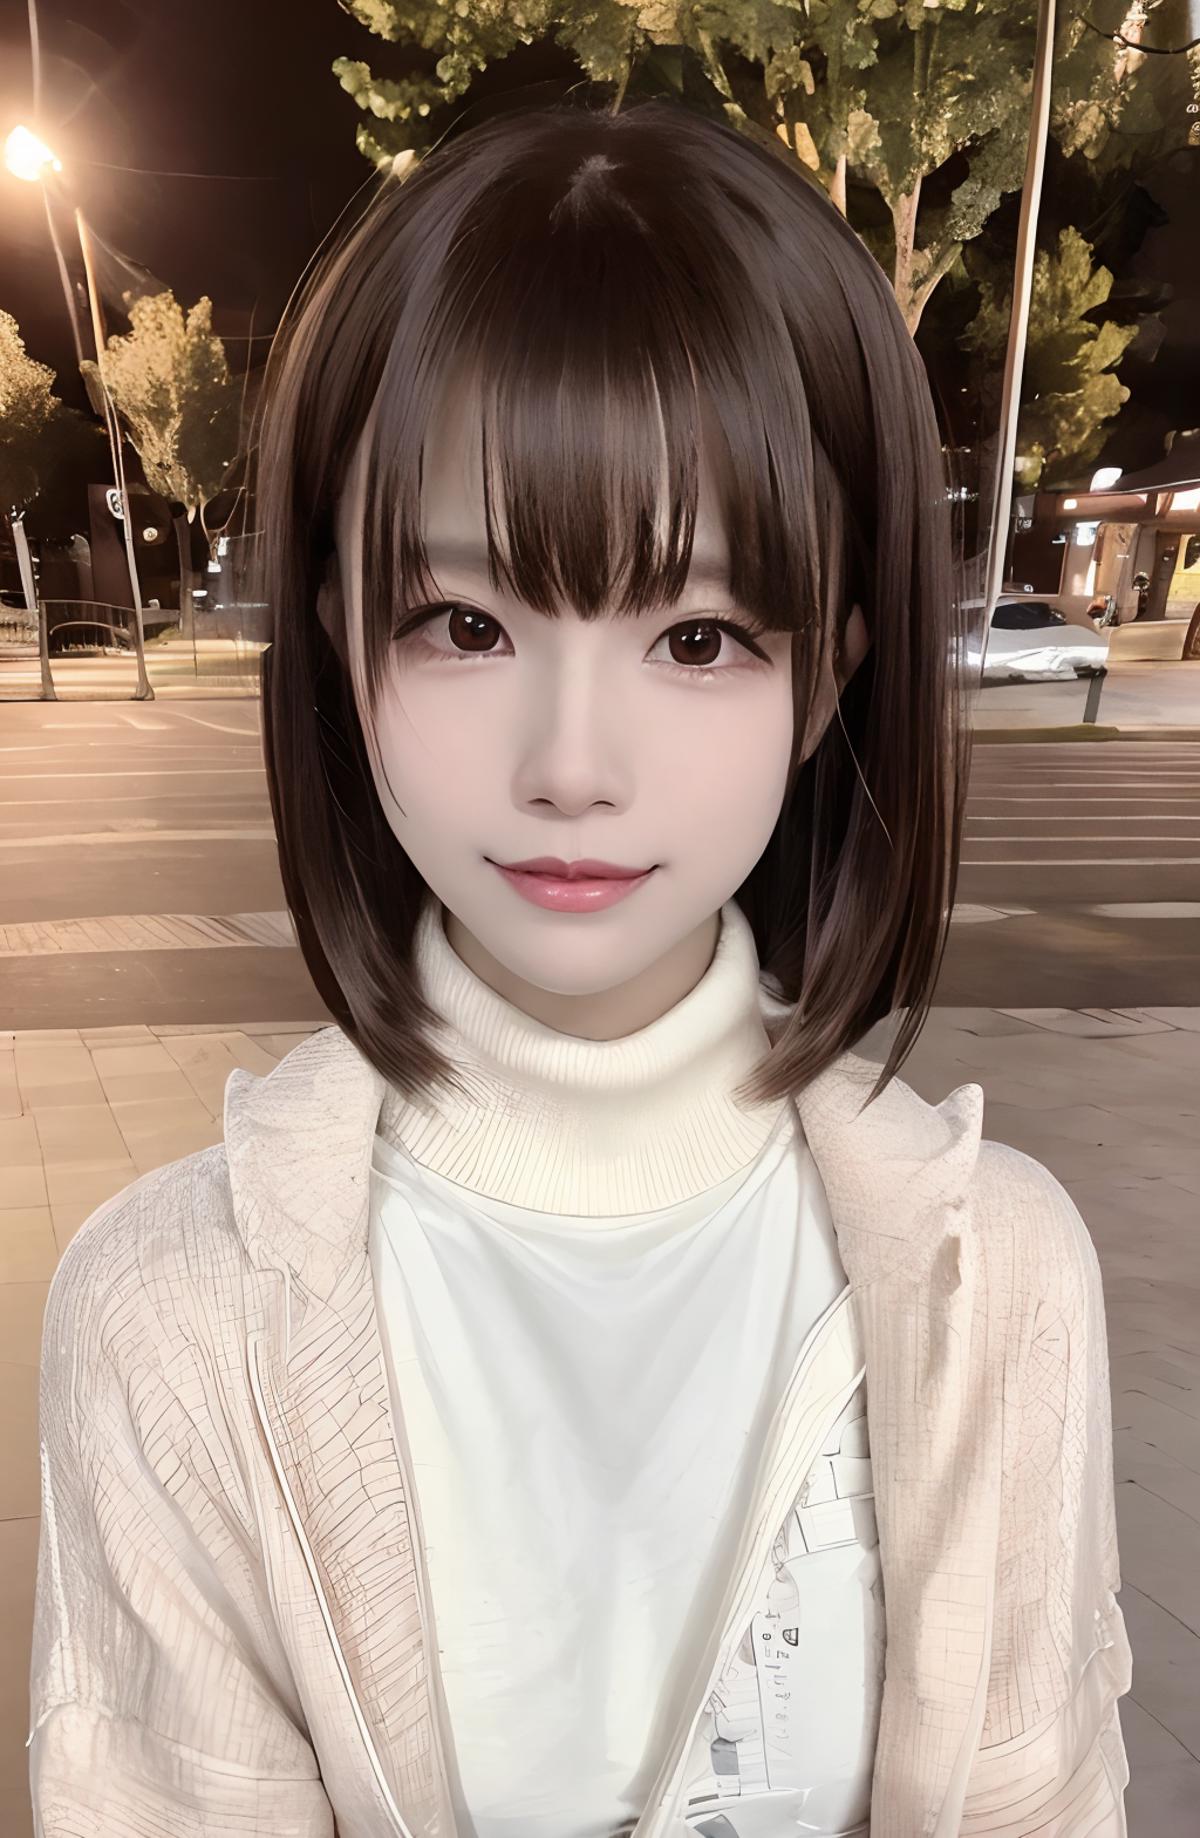 AI model image by Snow_Meteors